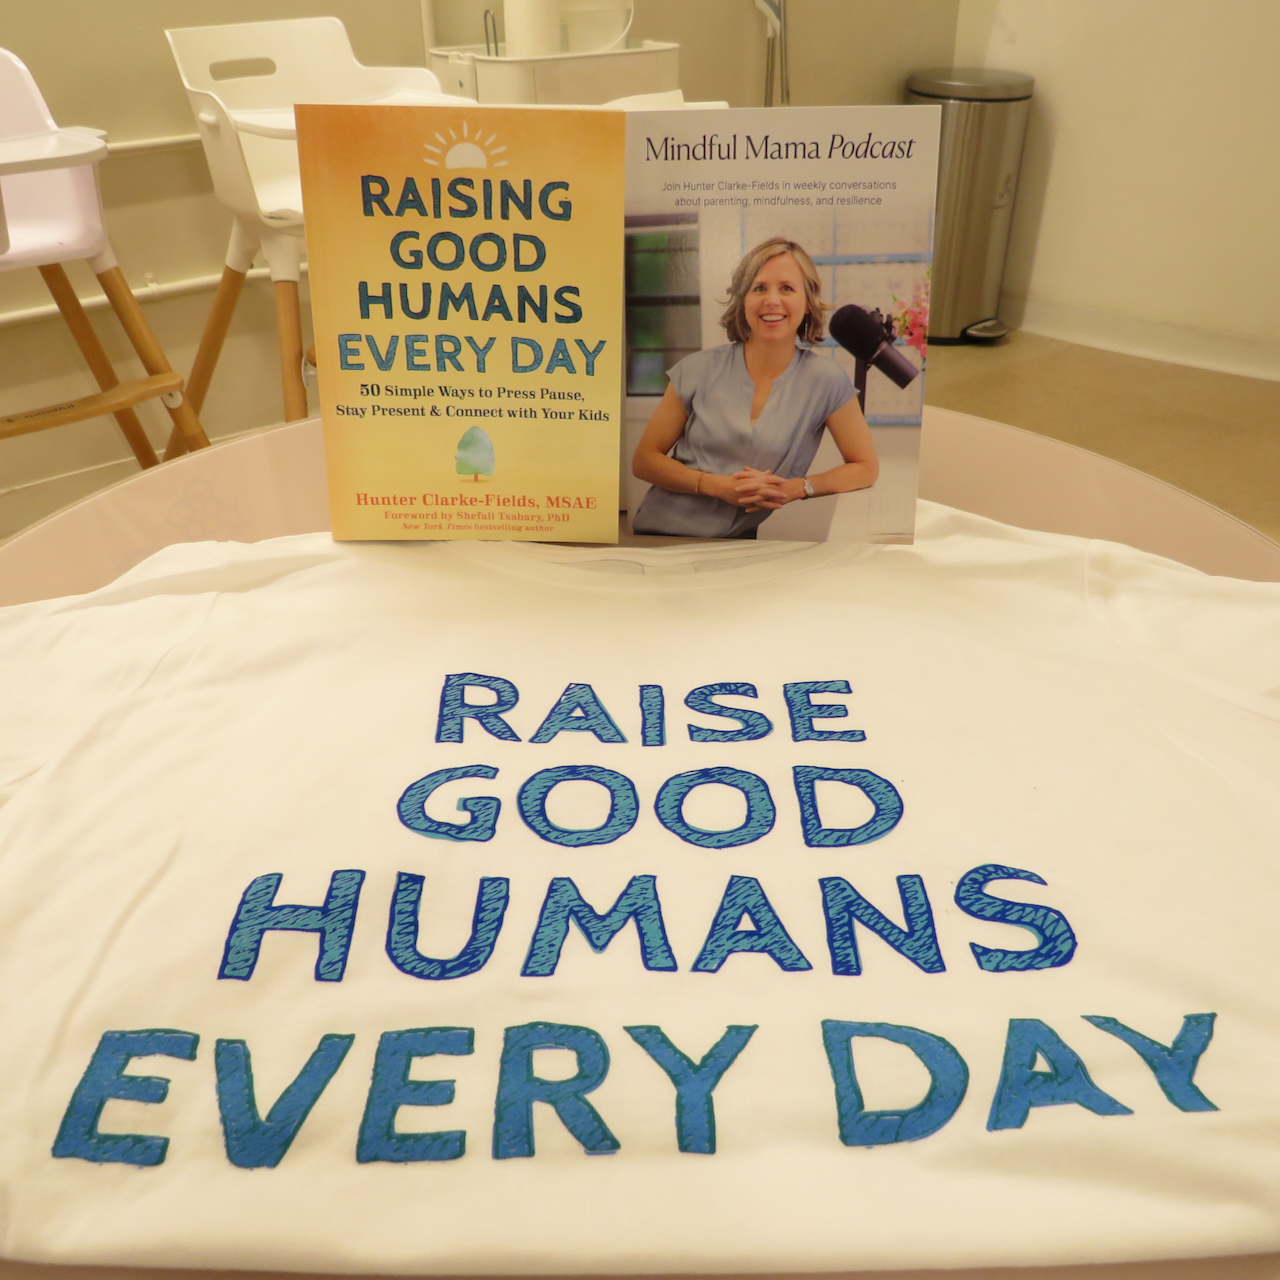 Mindful Mama Mentor Hunter Clarke-Fields announces new parenting book: “Raising Good Humans Every Day - 50 Simple Ways to Press Pause, Stay Present and Connect with your Kids” at Cocoon NYC